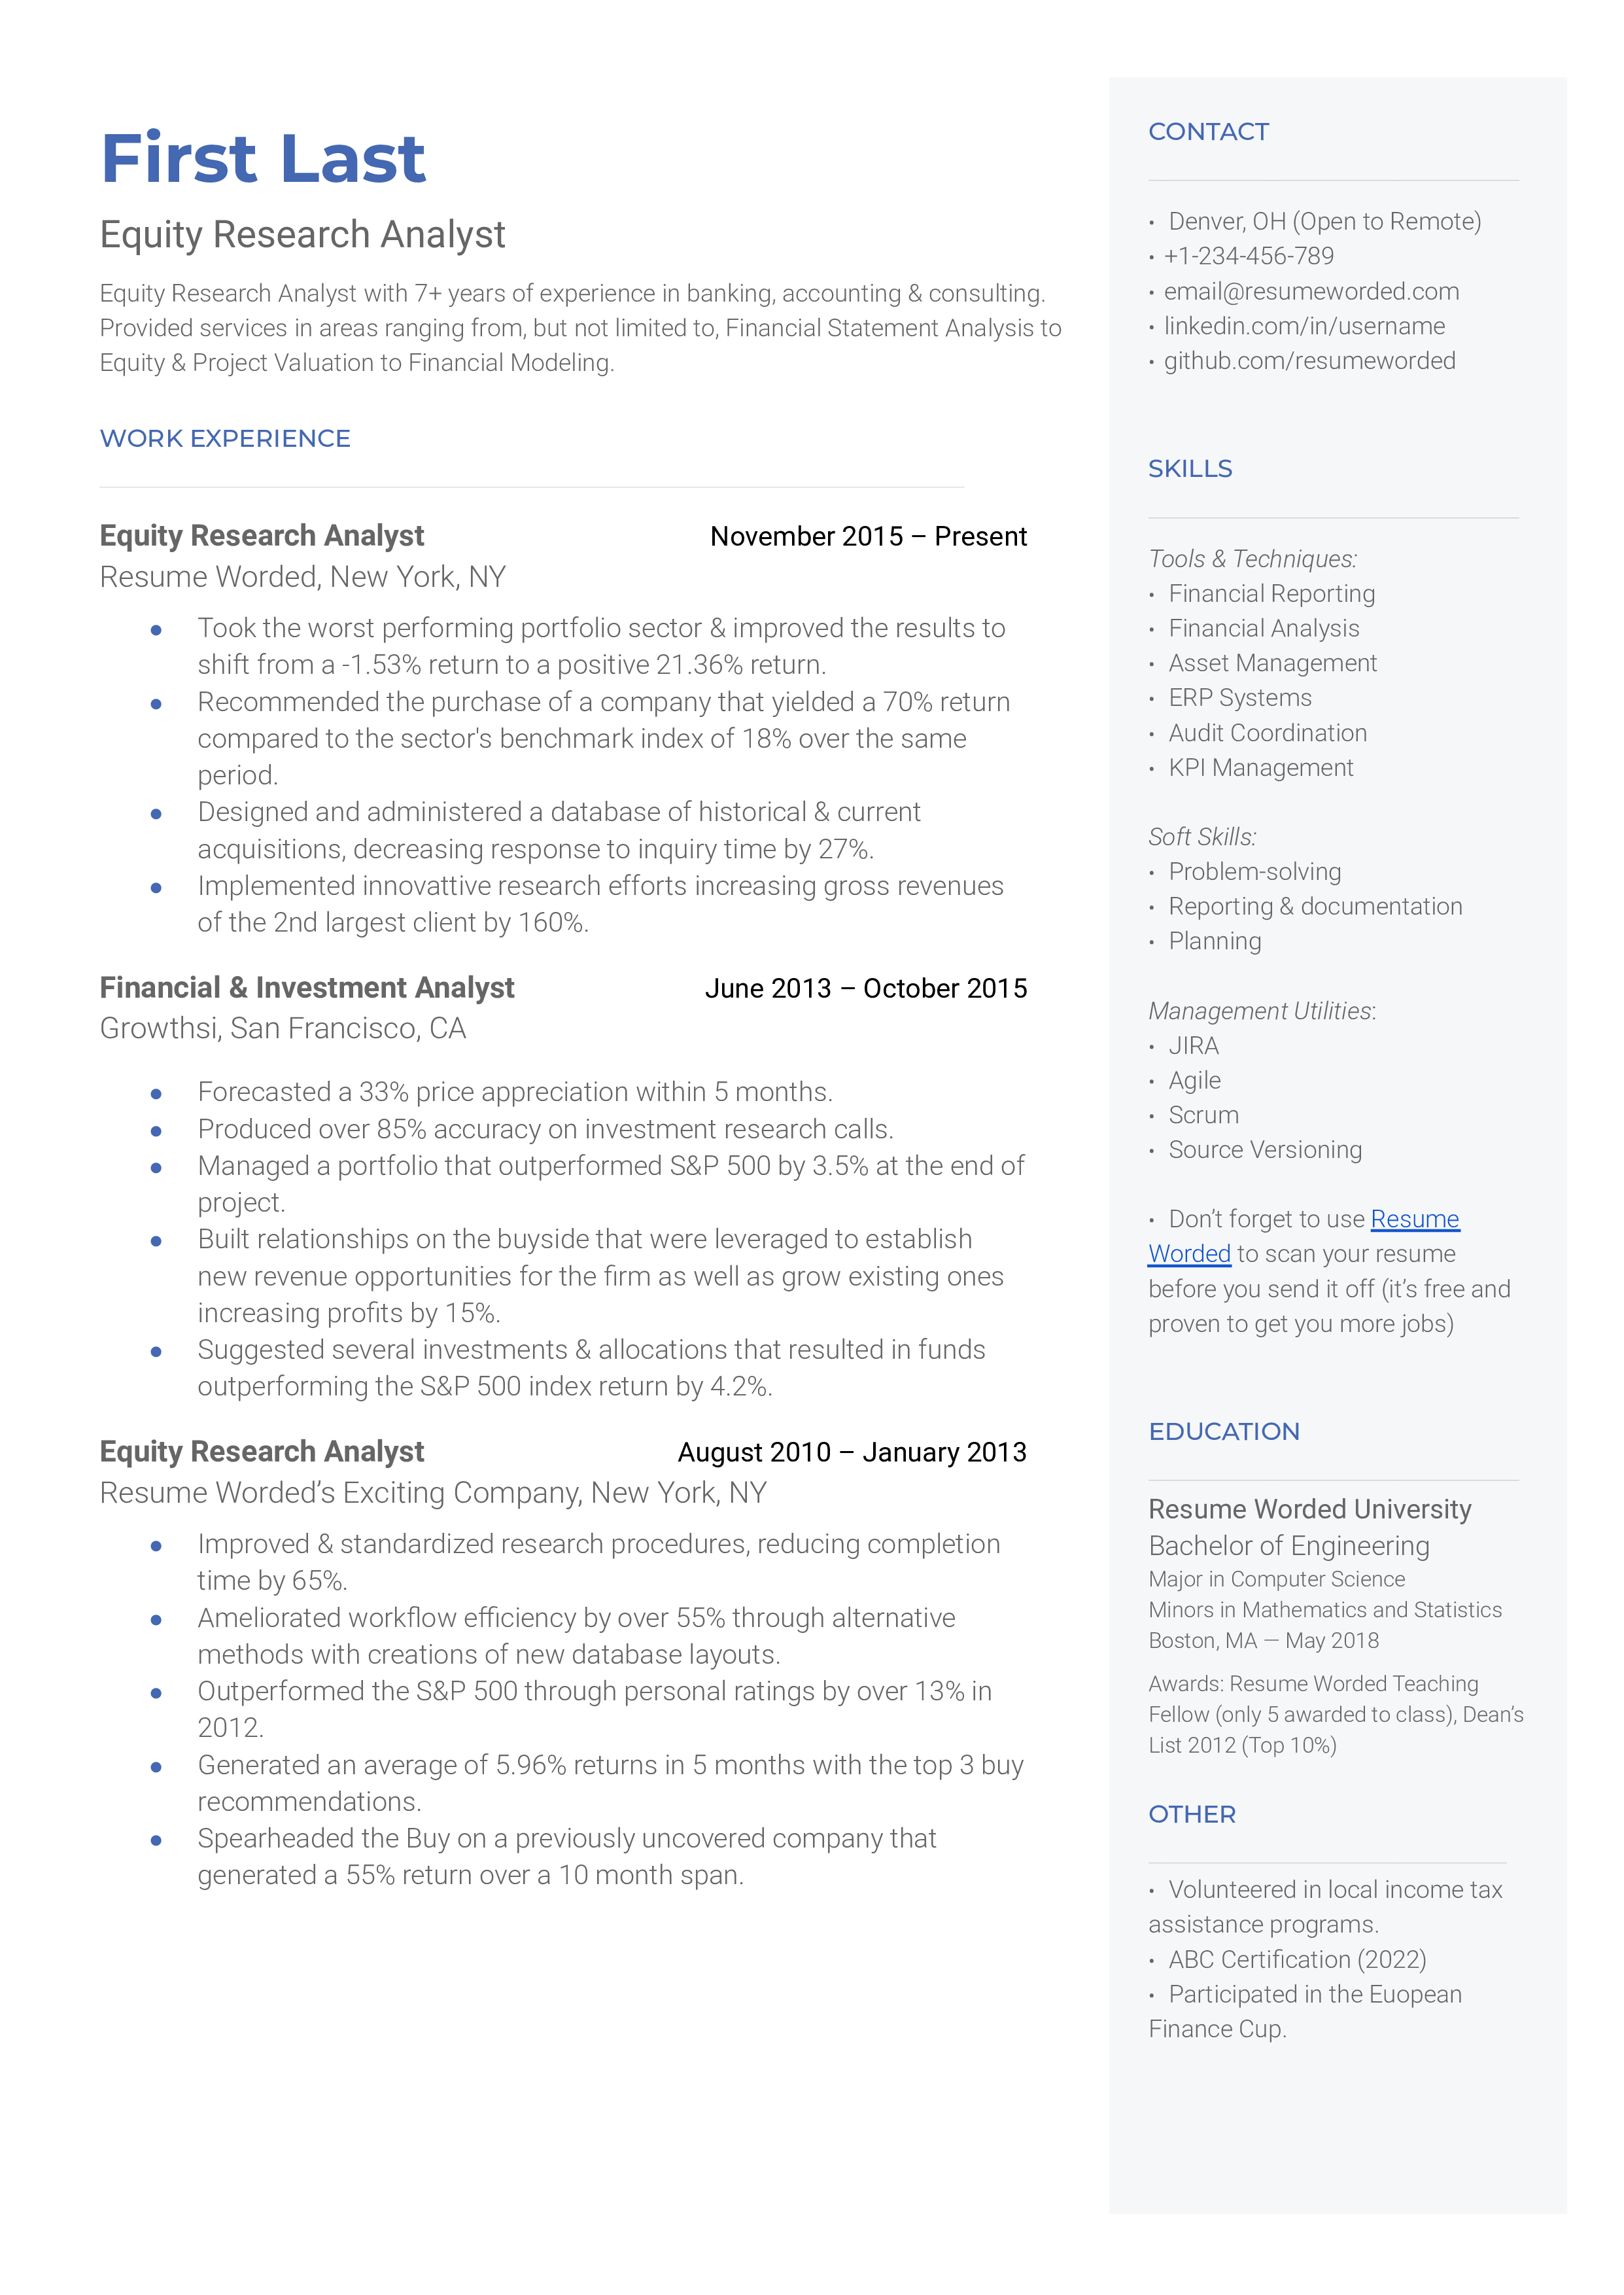 Equity Research Analyst Resume Sample